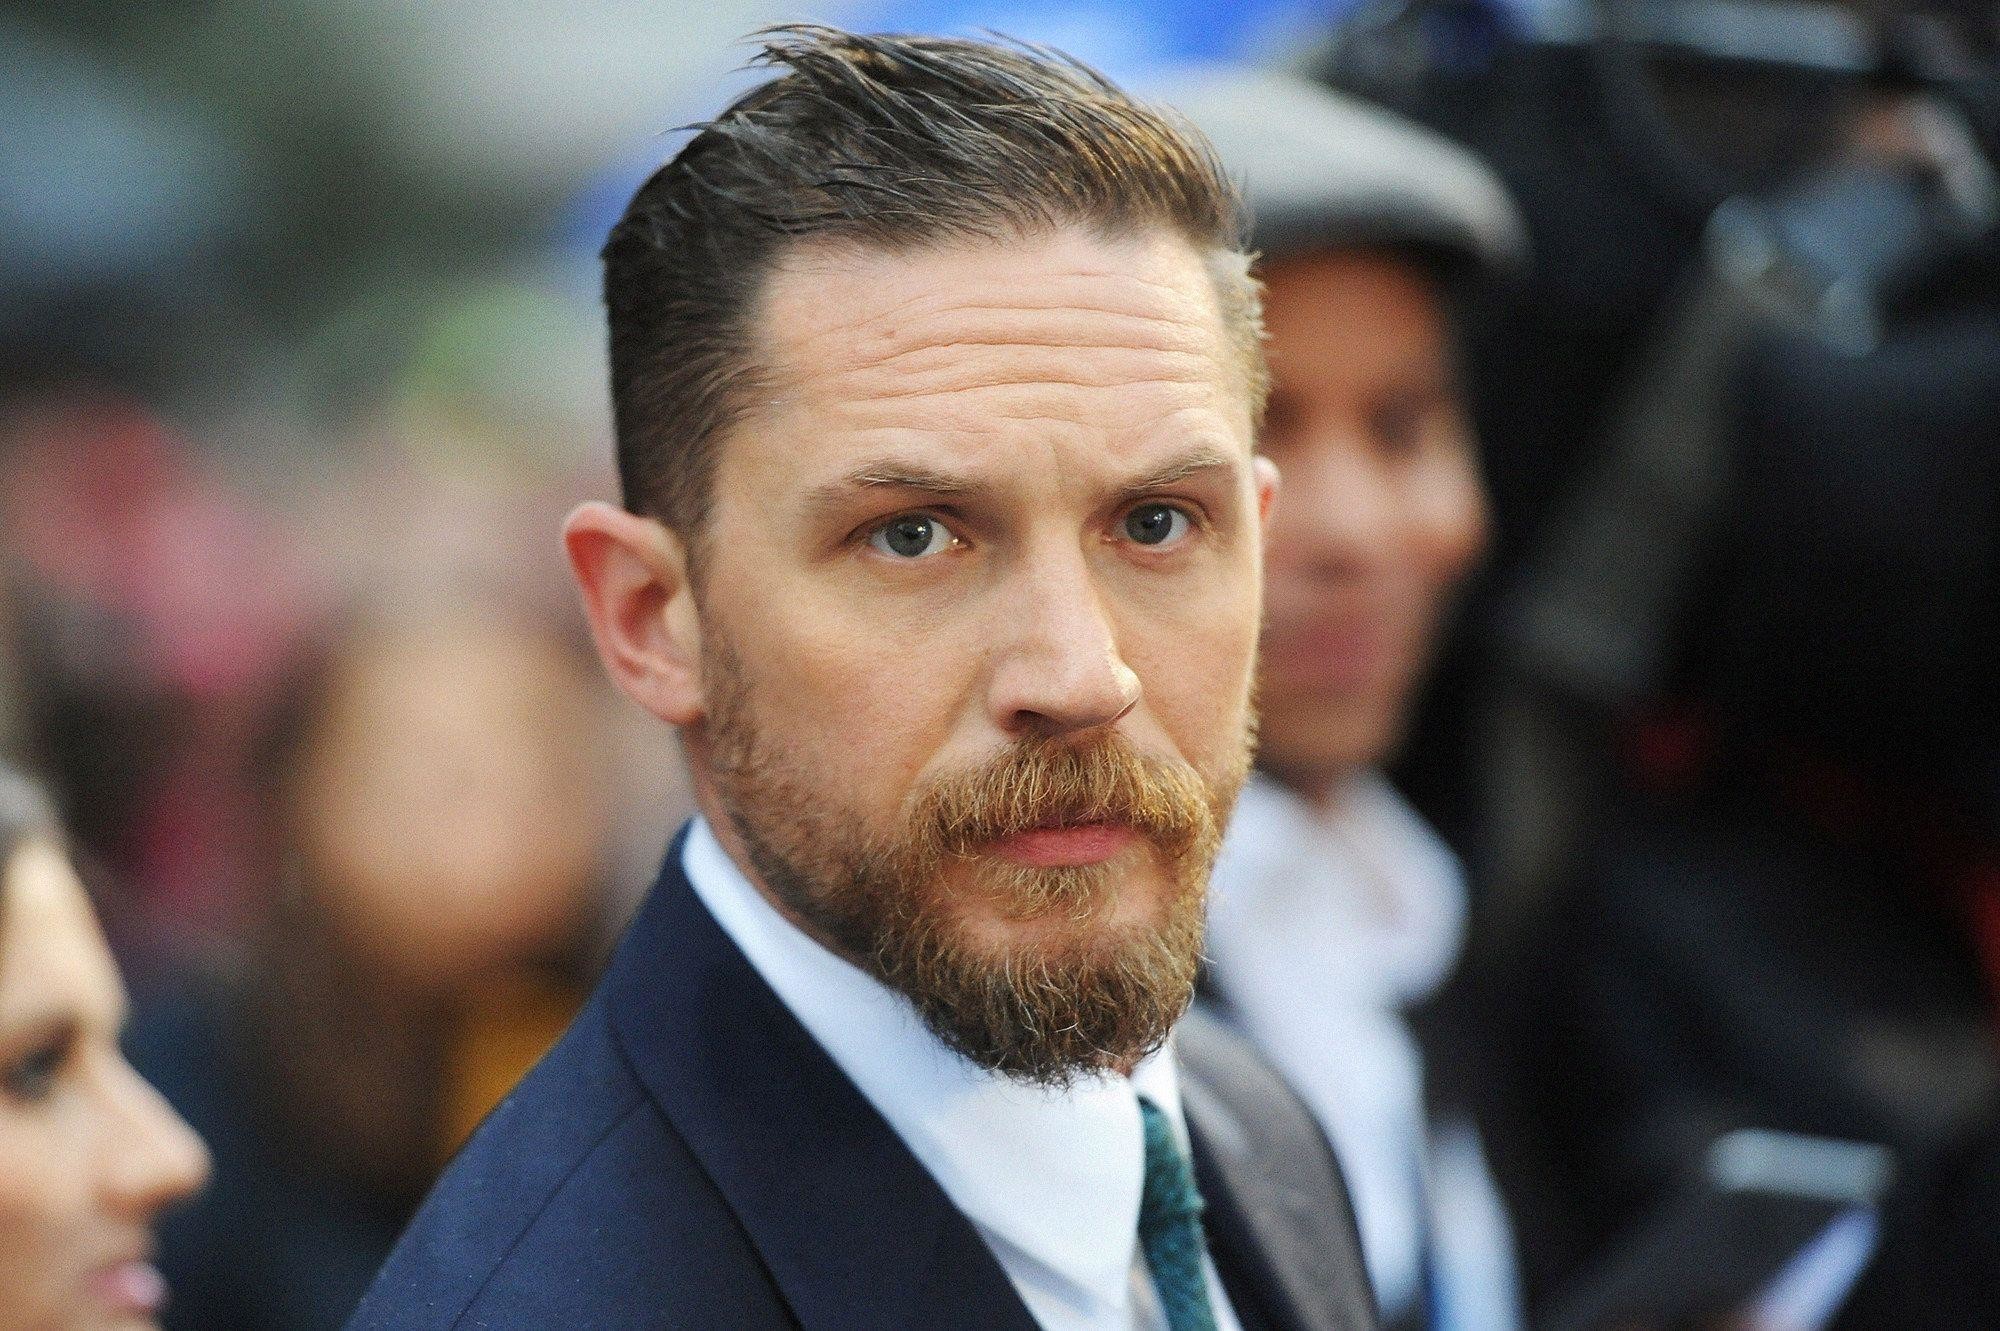 2000x1331 2000 x 1331 pxTom Hardy Wallpapers - Wallpaper Cave. Tom Hardy HD Wallpapers  for desktop download.